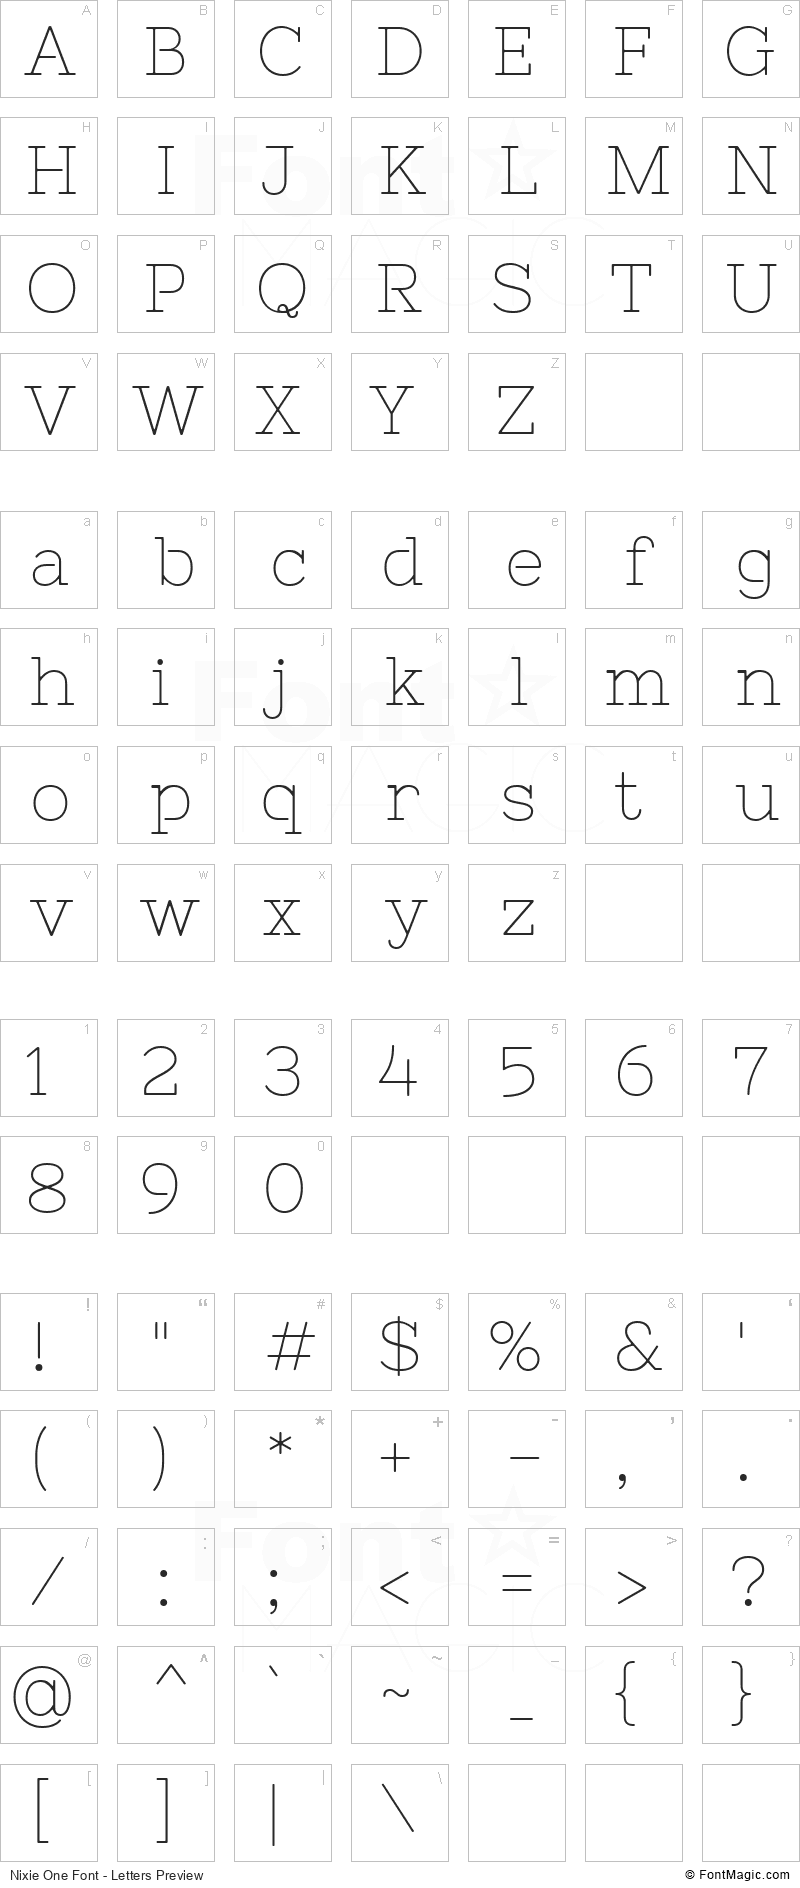 Nixie One Font - All Latters Preview Chart